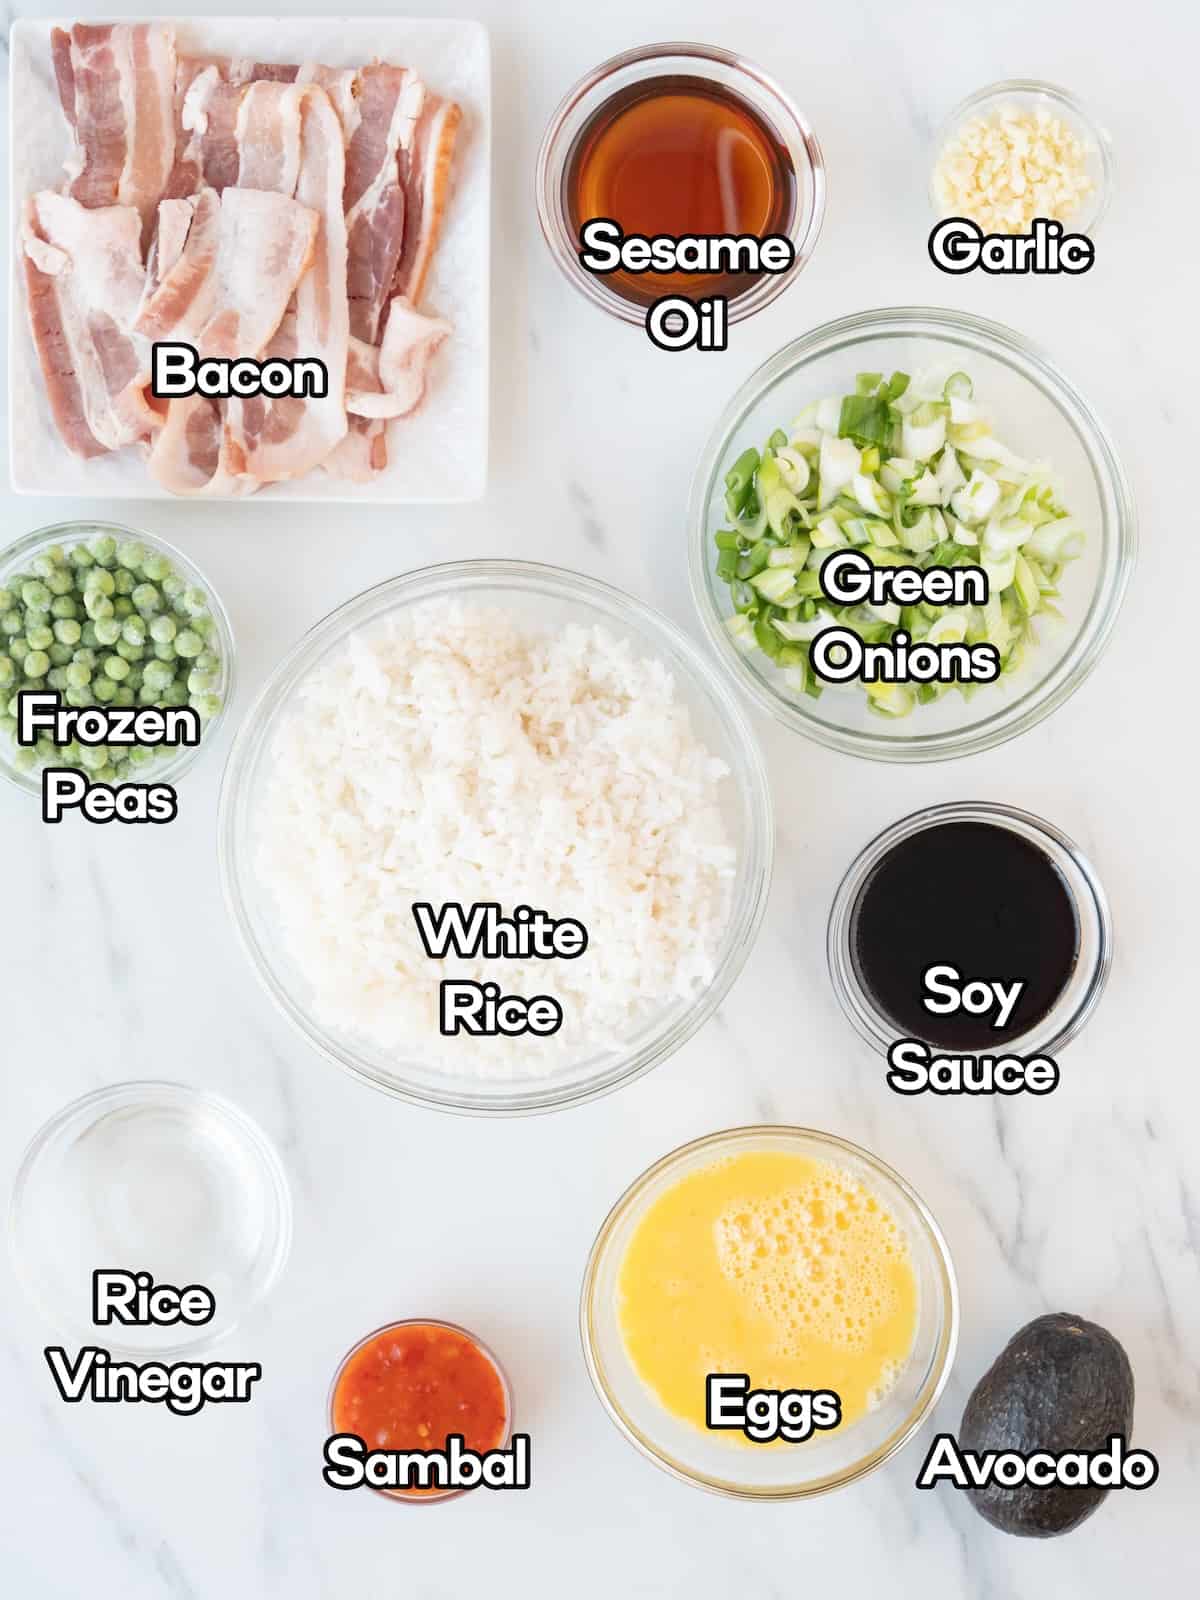 Mise-en-place of all the ingredients required to make spicy bacon fried rice.